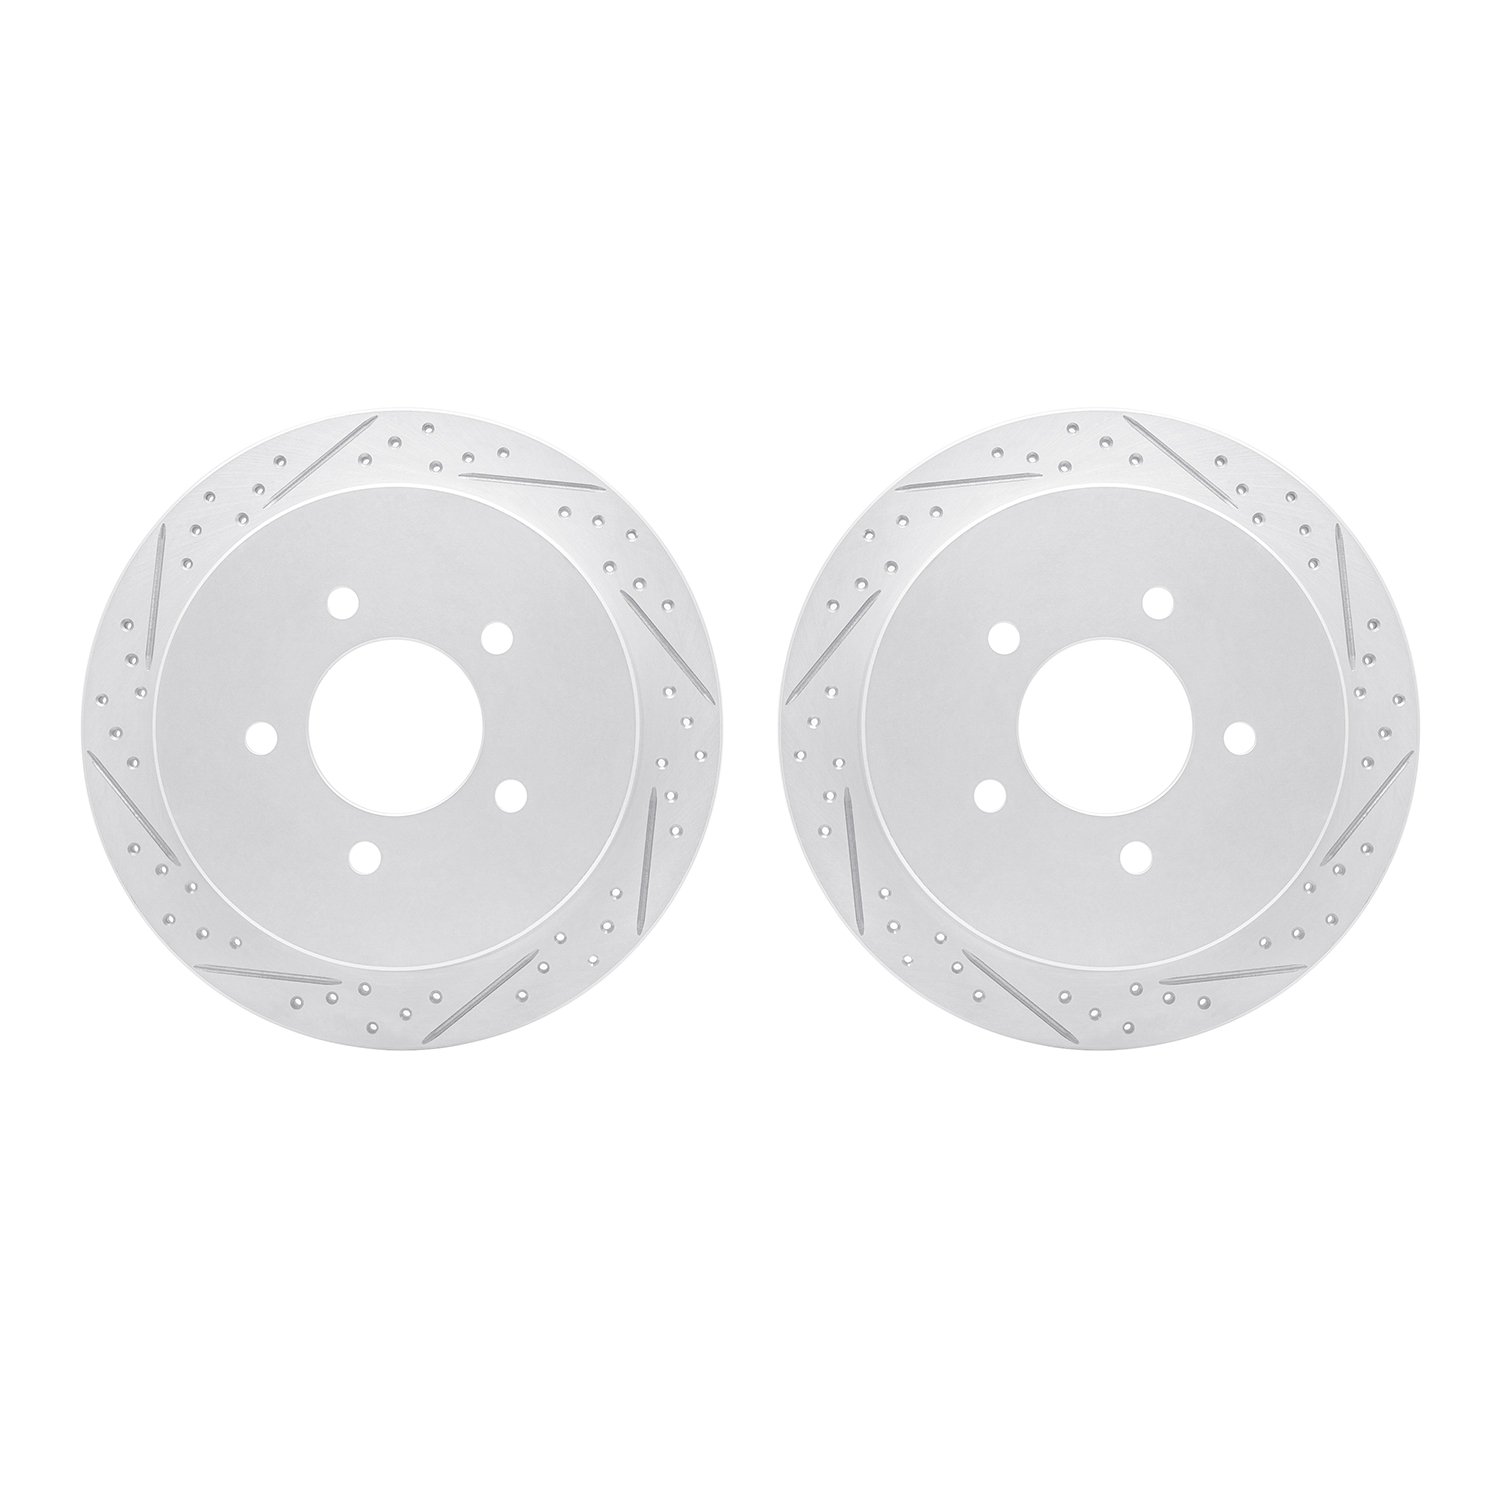 2002-54136 Geoperformance Drilled/Slotted Brake Rotors, 1997-2004 Ford/Lincoln/Mercury/Mazda, Position: Rear